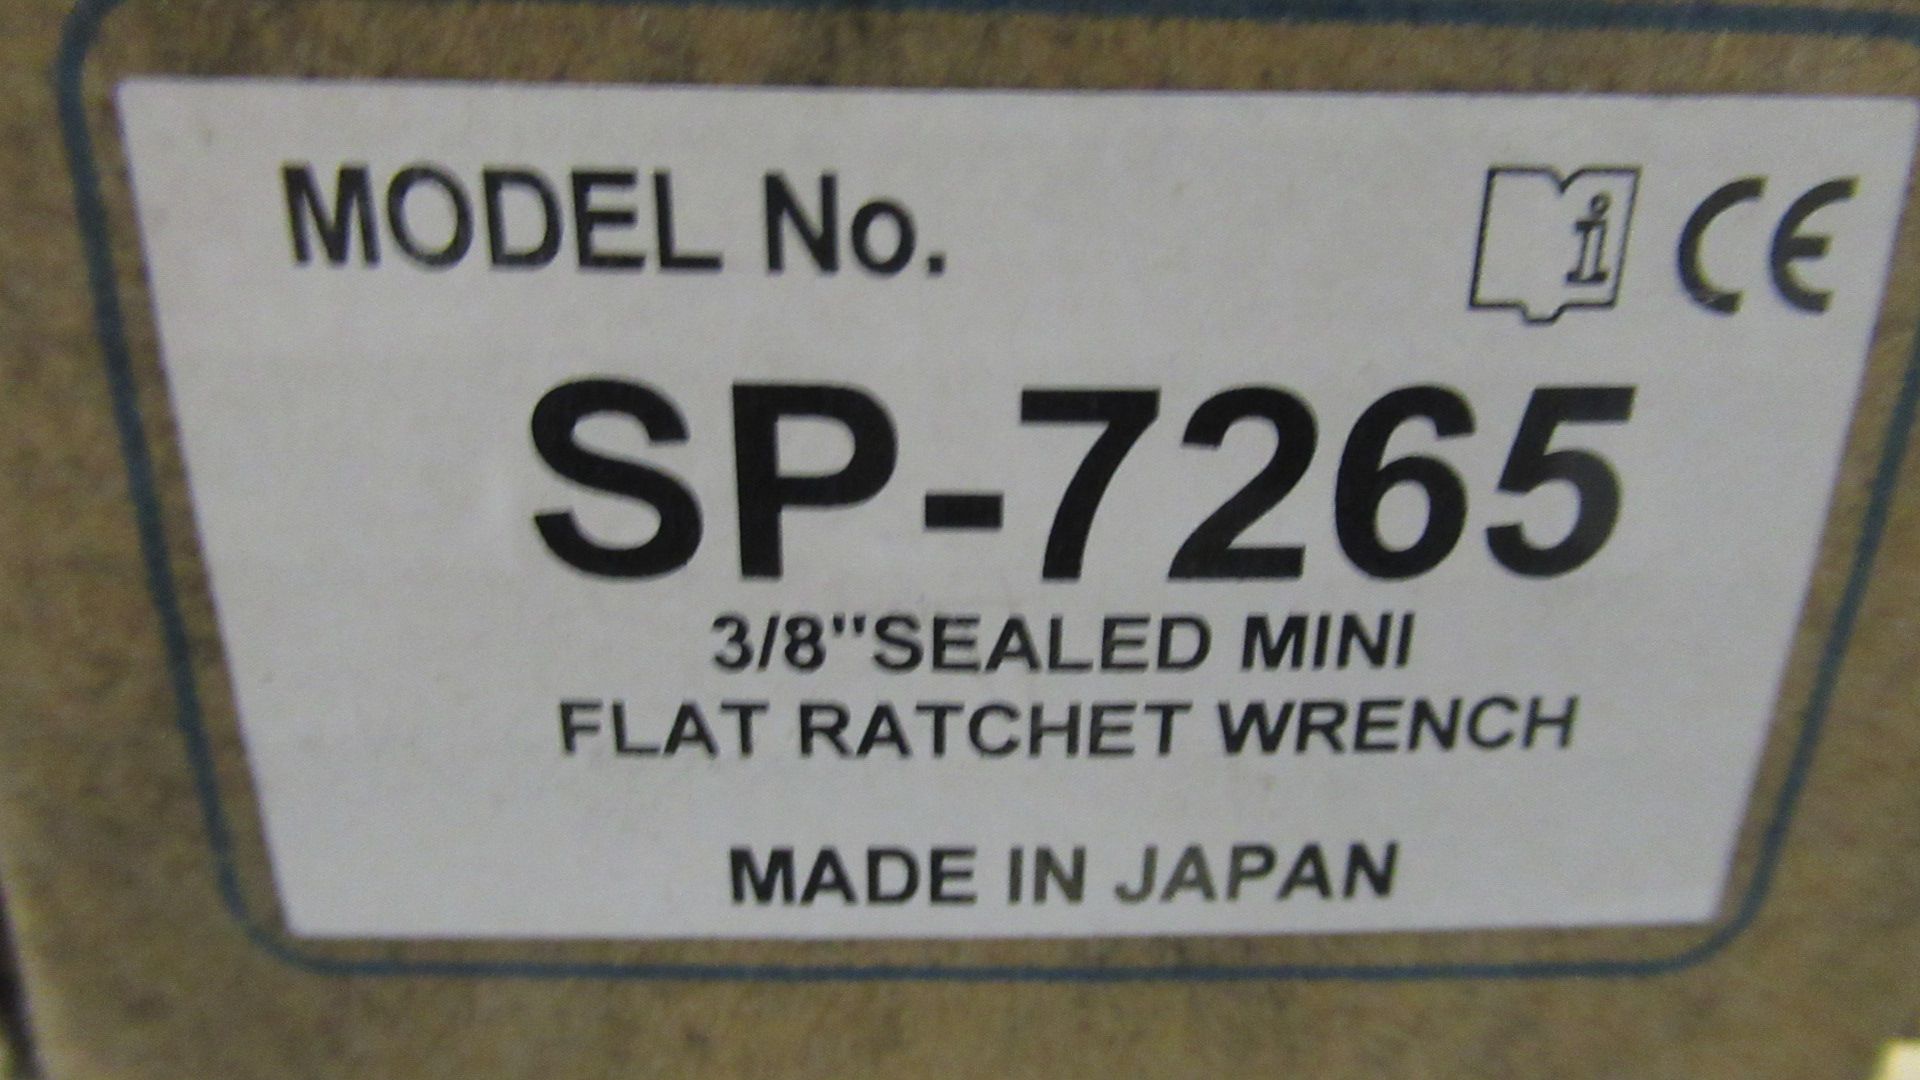 3/8" SEALED MINI FLAT RATCHET WRENCH SP-AIR SP-7265 - Image 2 of 2